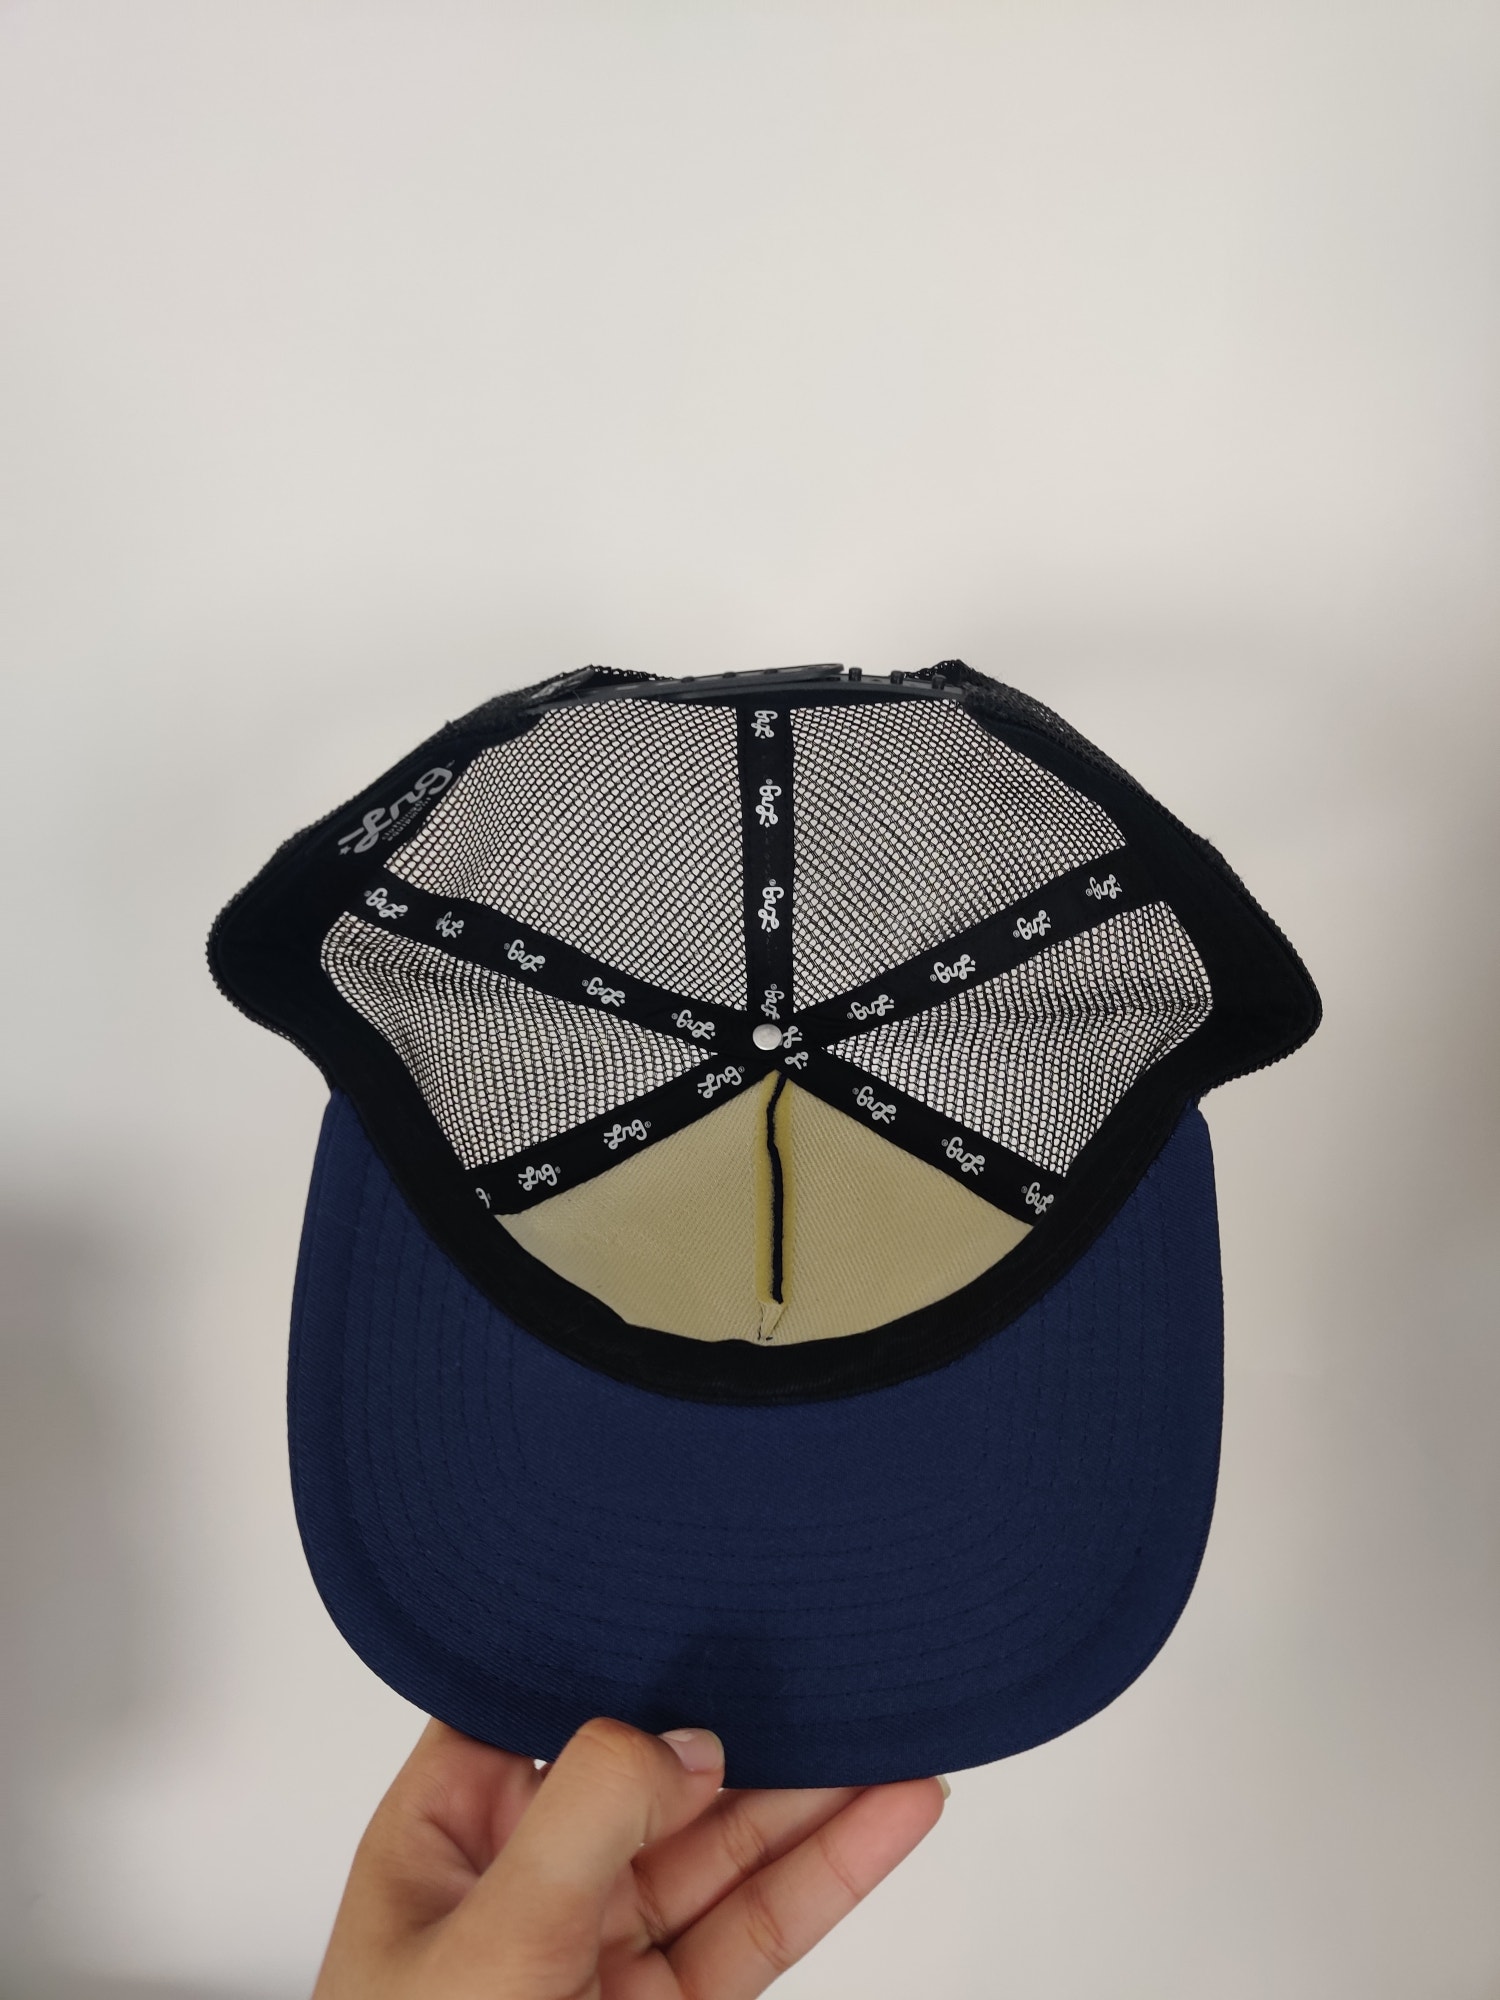 (V) ORIGINAL LRG Unisex hat hiking casual mesh back navy One size  - Picture 10 of 11